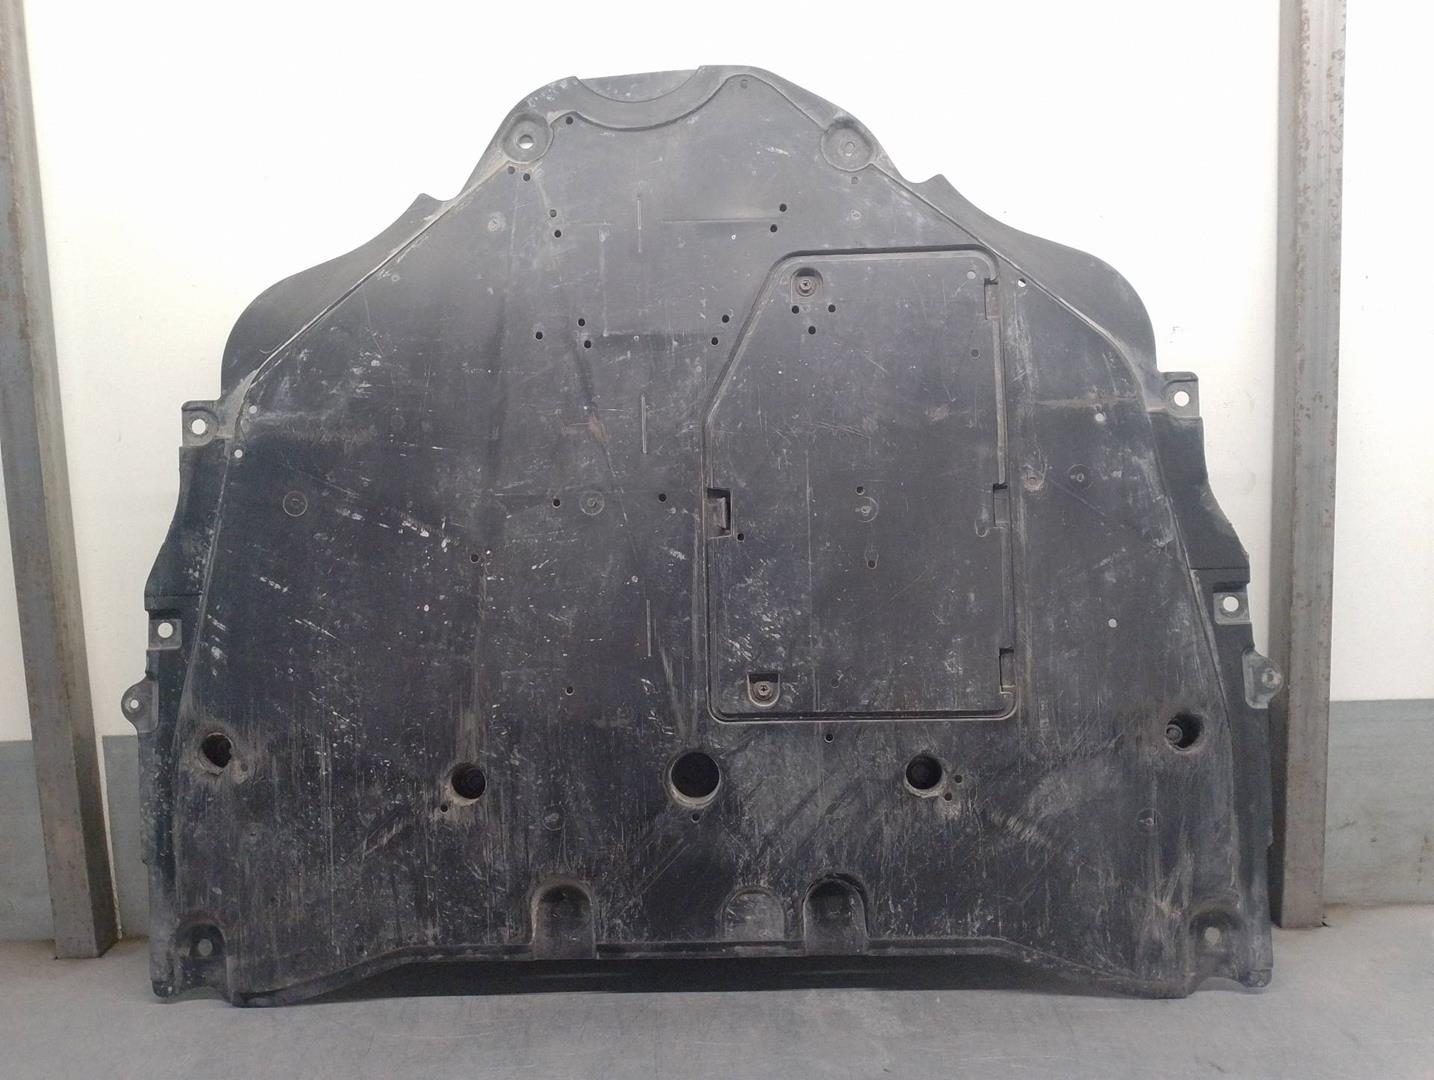 TOYOTA Yaris 3 generation (2010-2019) Front Engine Cover 51410K0050, *CESTA37-A 24530991